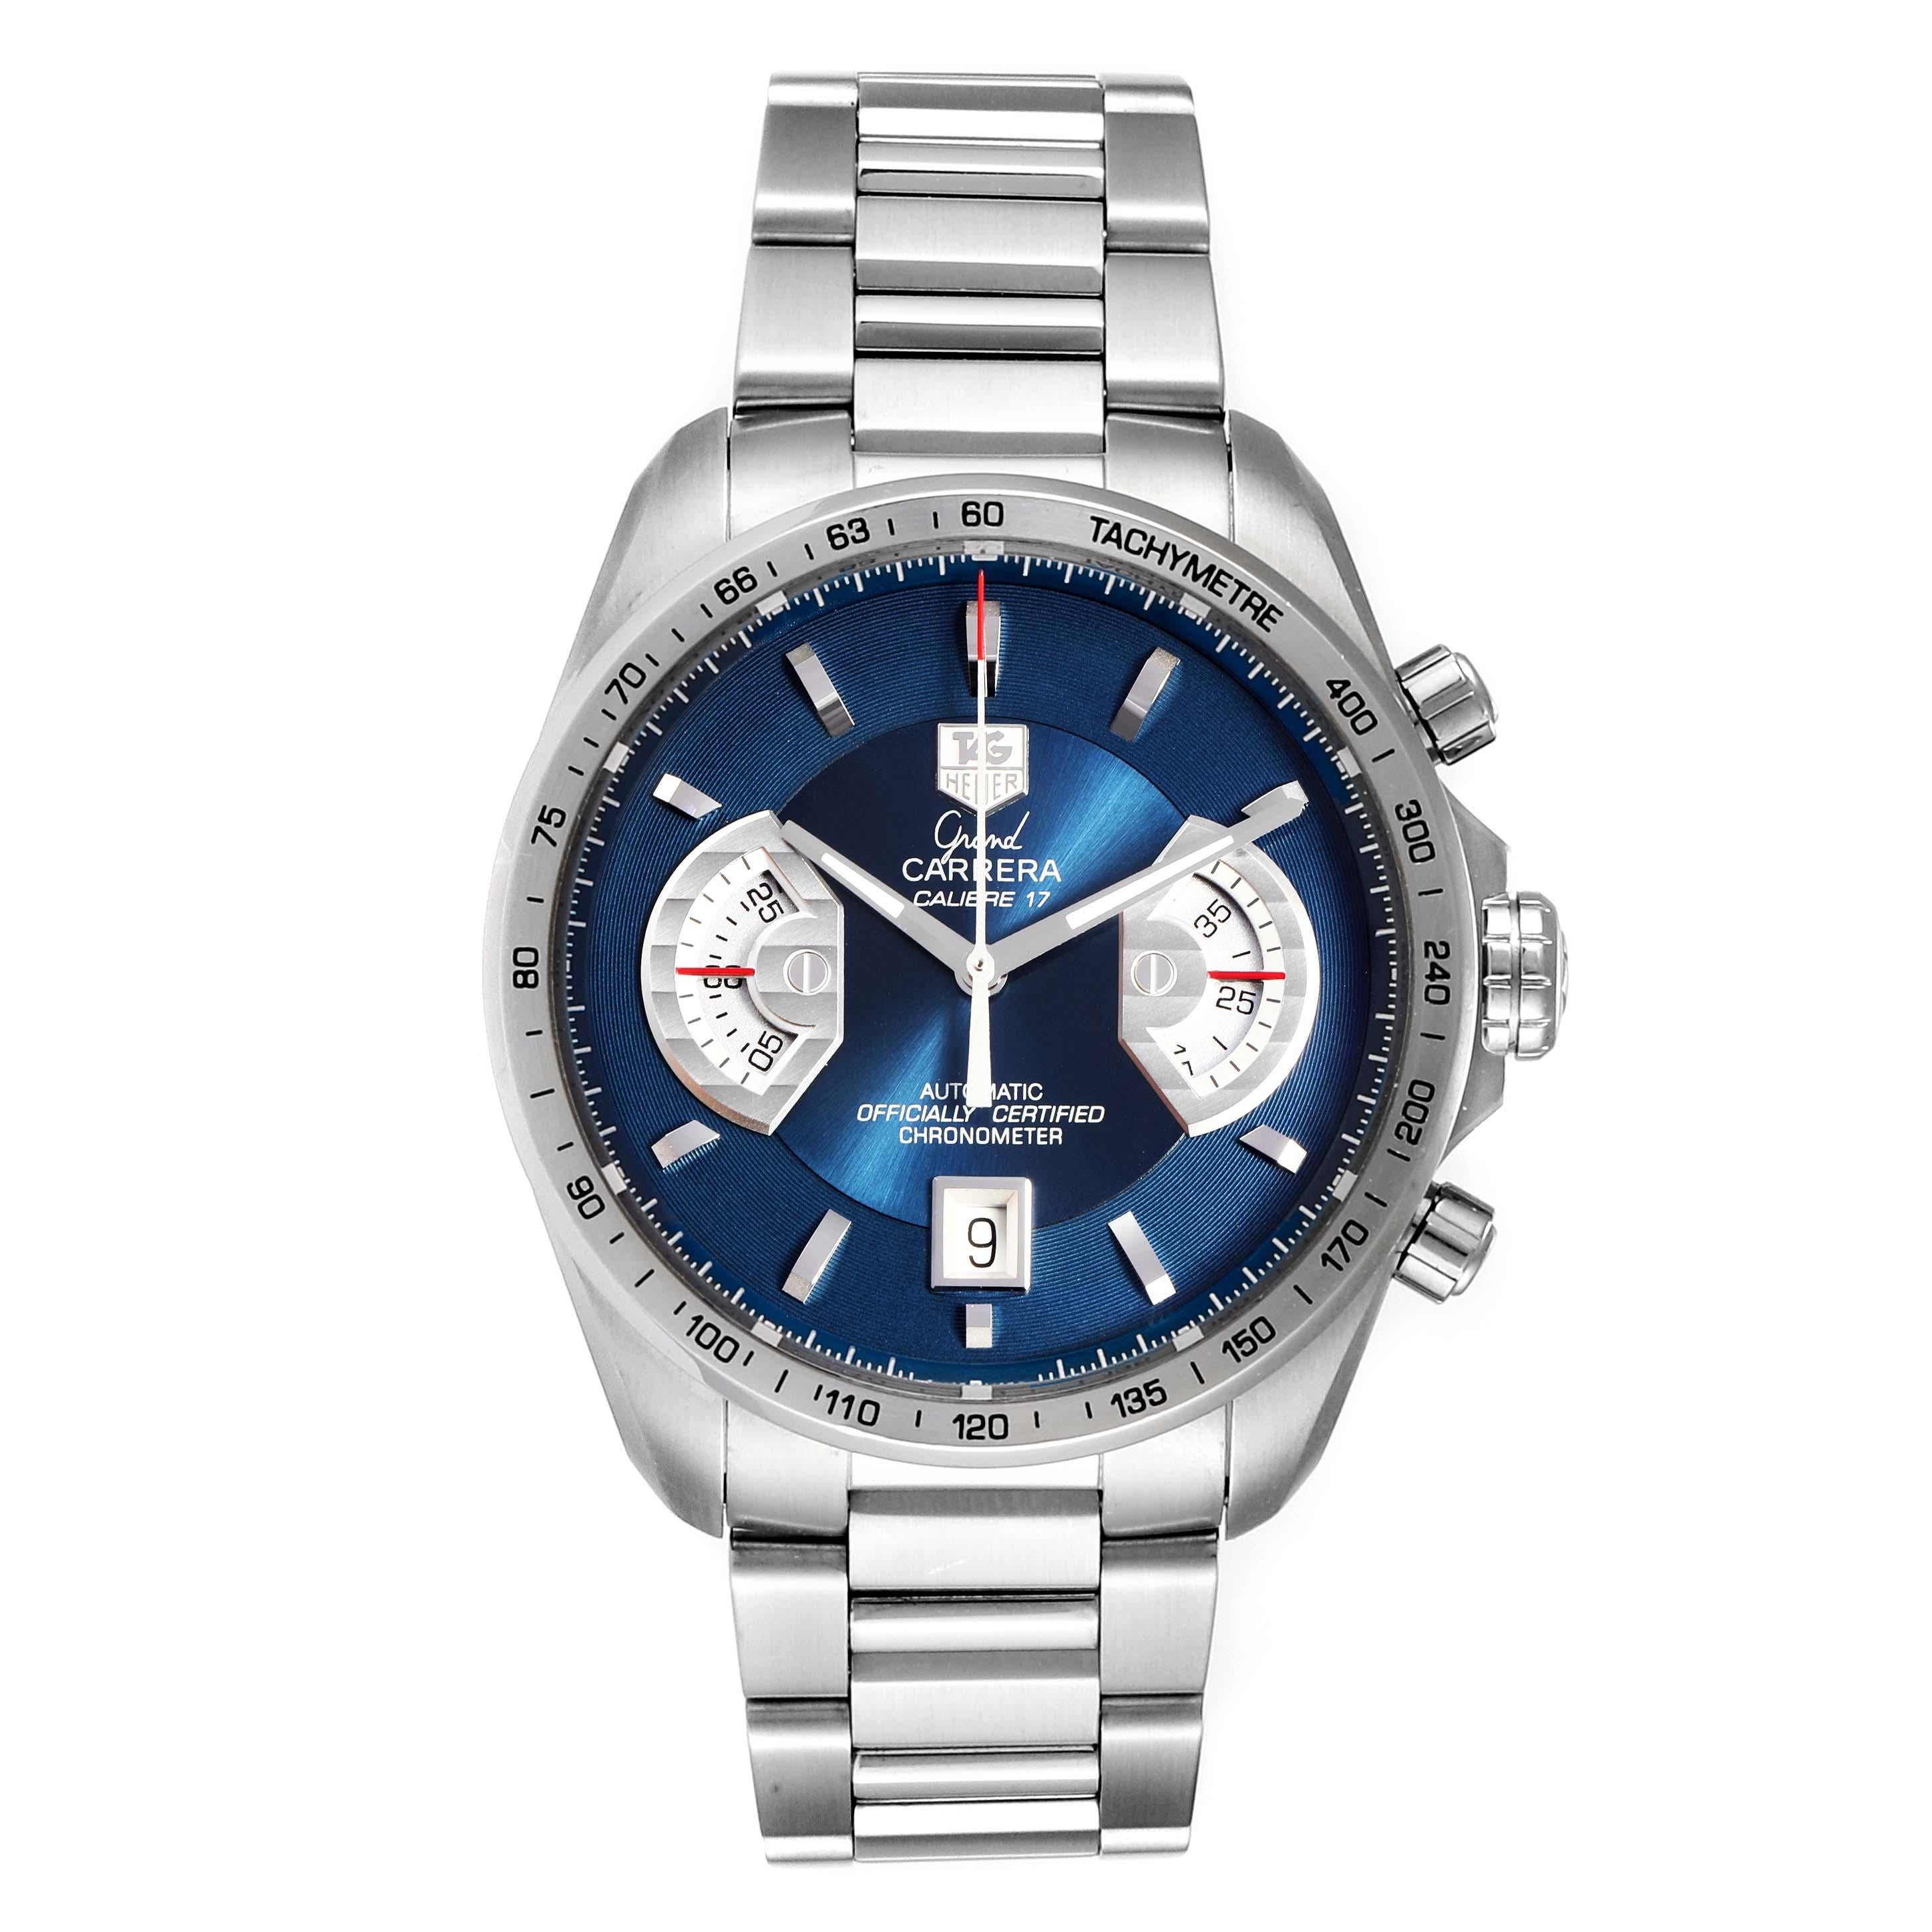 Tag Heuer Grand Carrera Blue Dial Limited Edition Watch CAV511F Box Card. Automatic self-winding movement. Stainless steel case 43.0 mm. Transperent sapphire crystal back. Stainless steel bezel with tachymeter scale. Scratch resistant sapphire